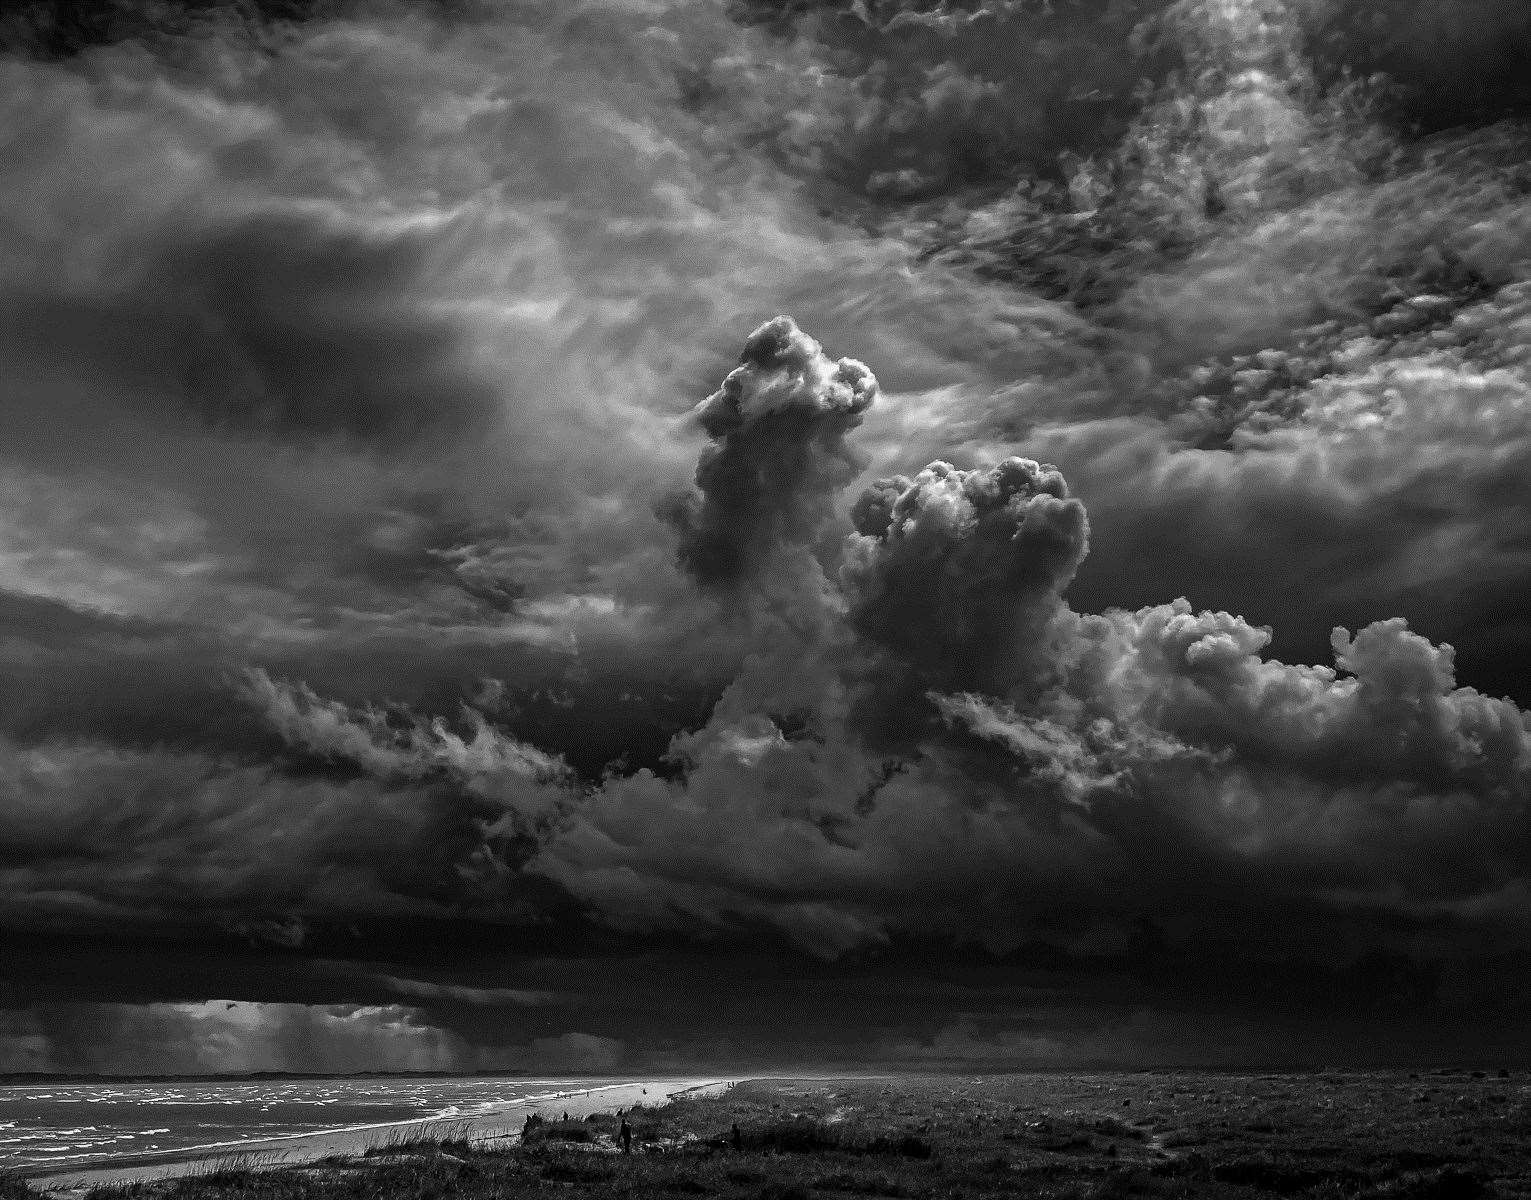 In the monochrome class, first prize went to Andy Kirby, Dornoch, with his Creature of the Sky – a momentary capture of beautifully lit storm clouds over the Dornoch Firth.